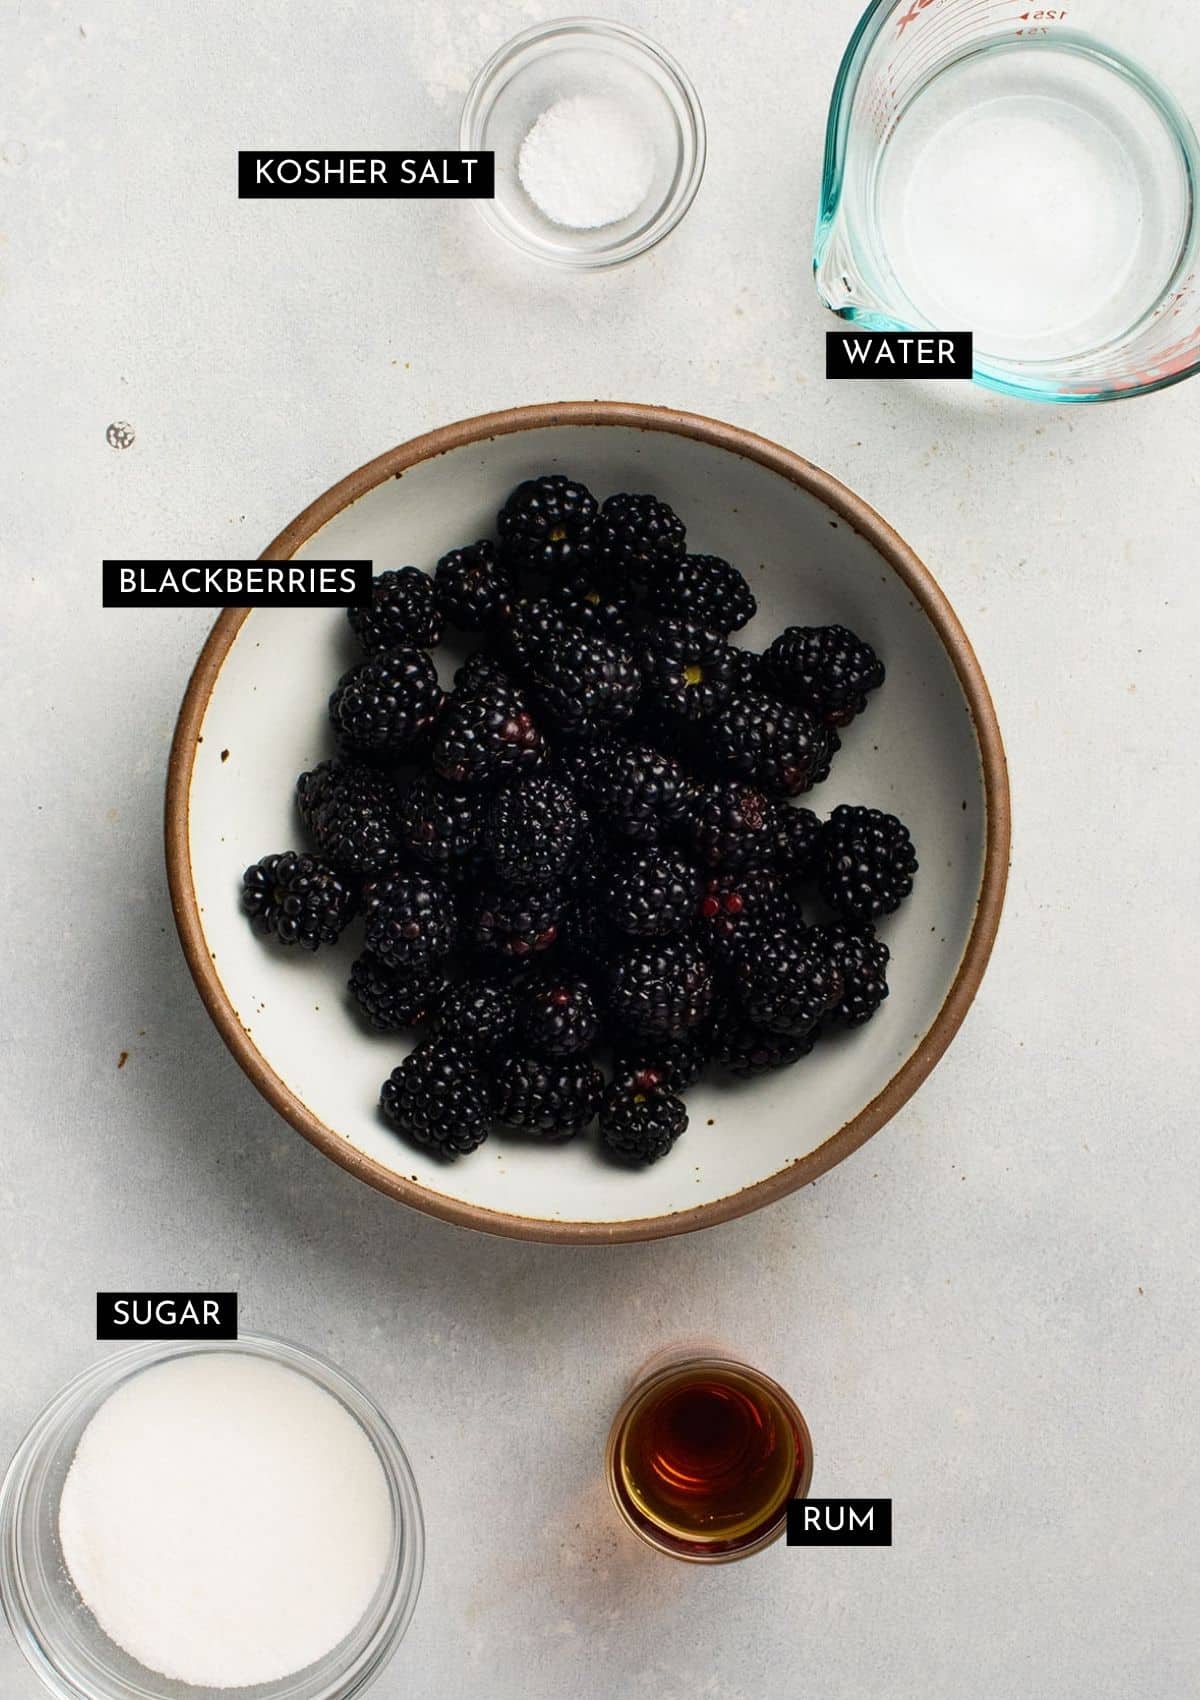 Fresh blackberries and other ingredients, organized into individual bowls.